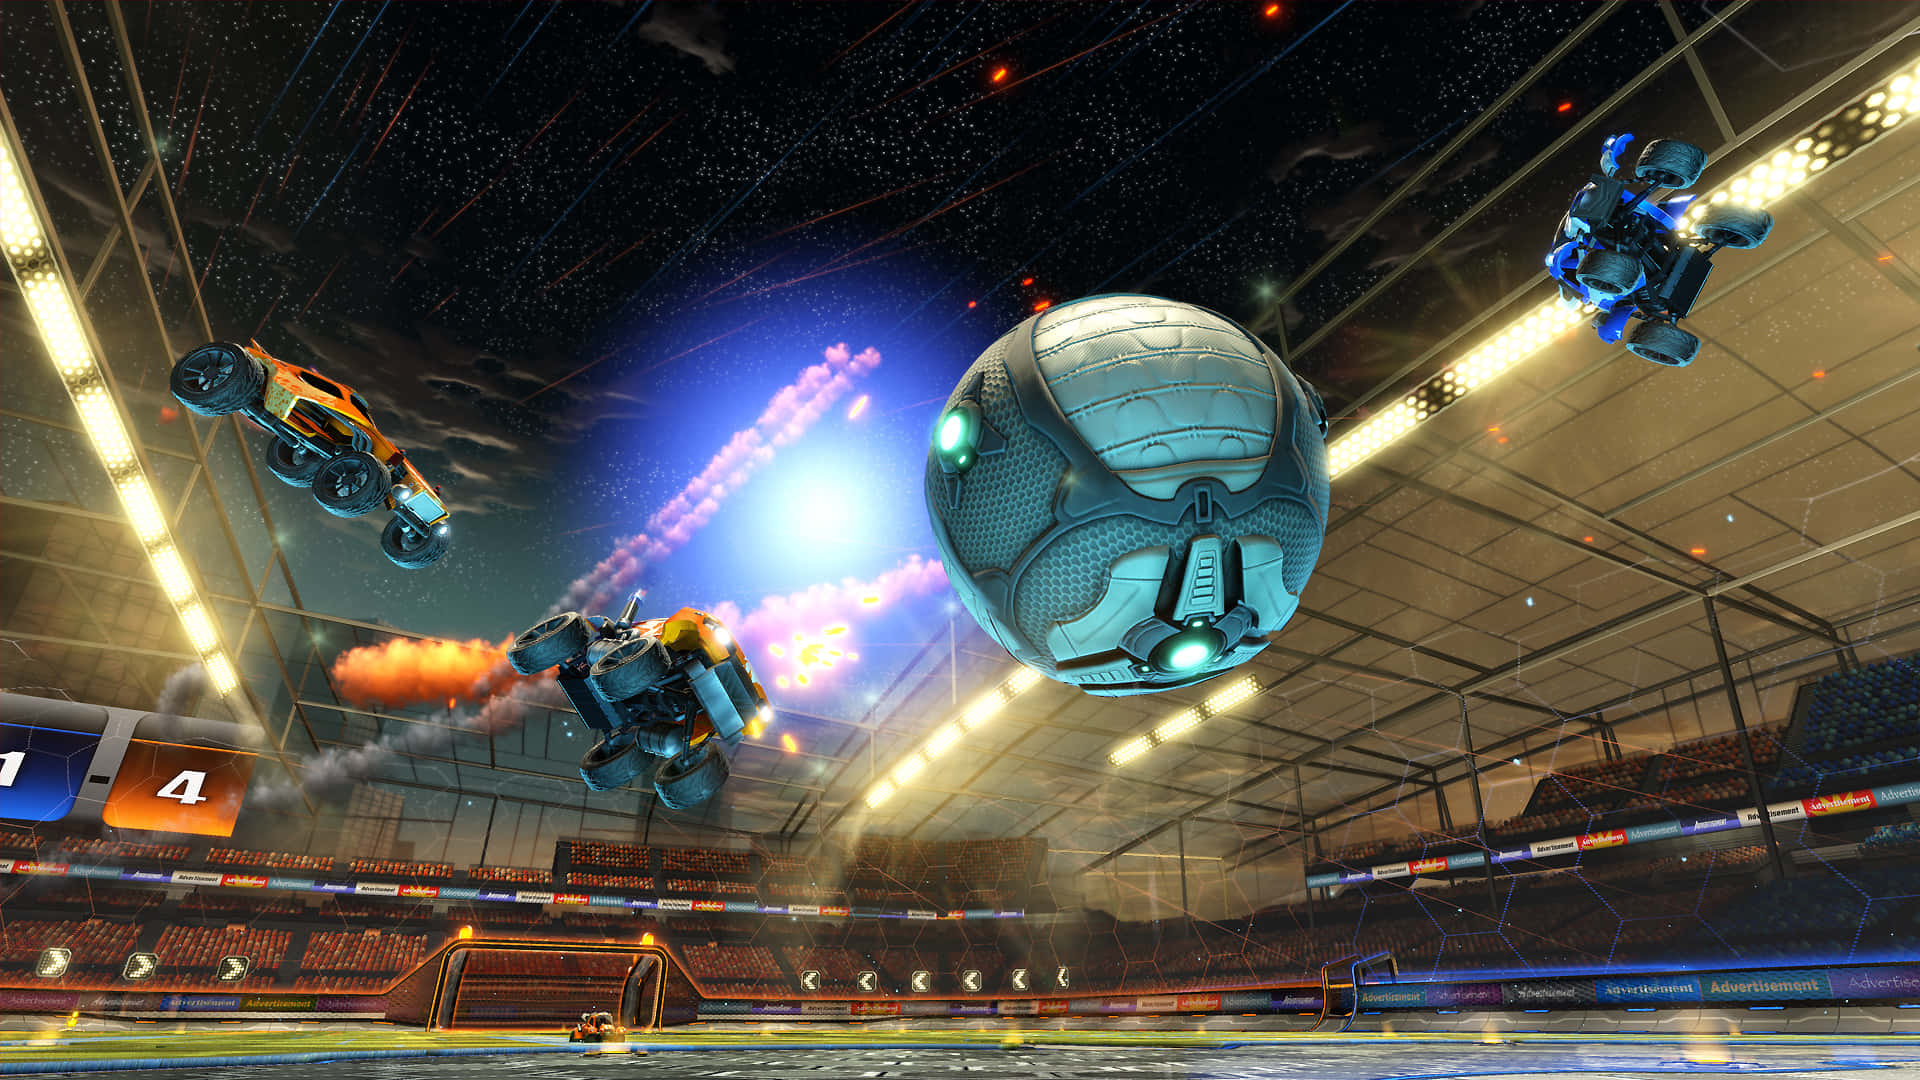 Explosive Gameplay On The Rocket League Field